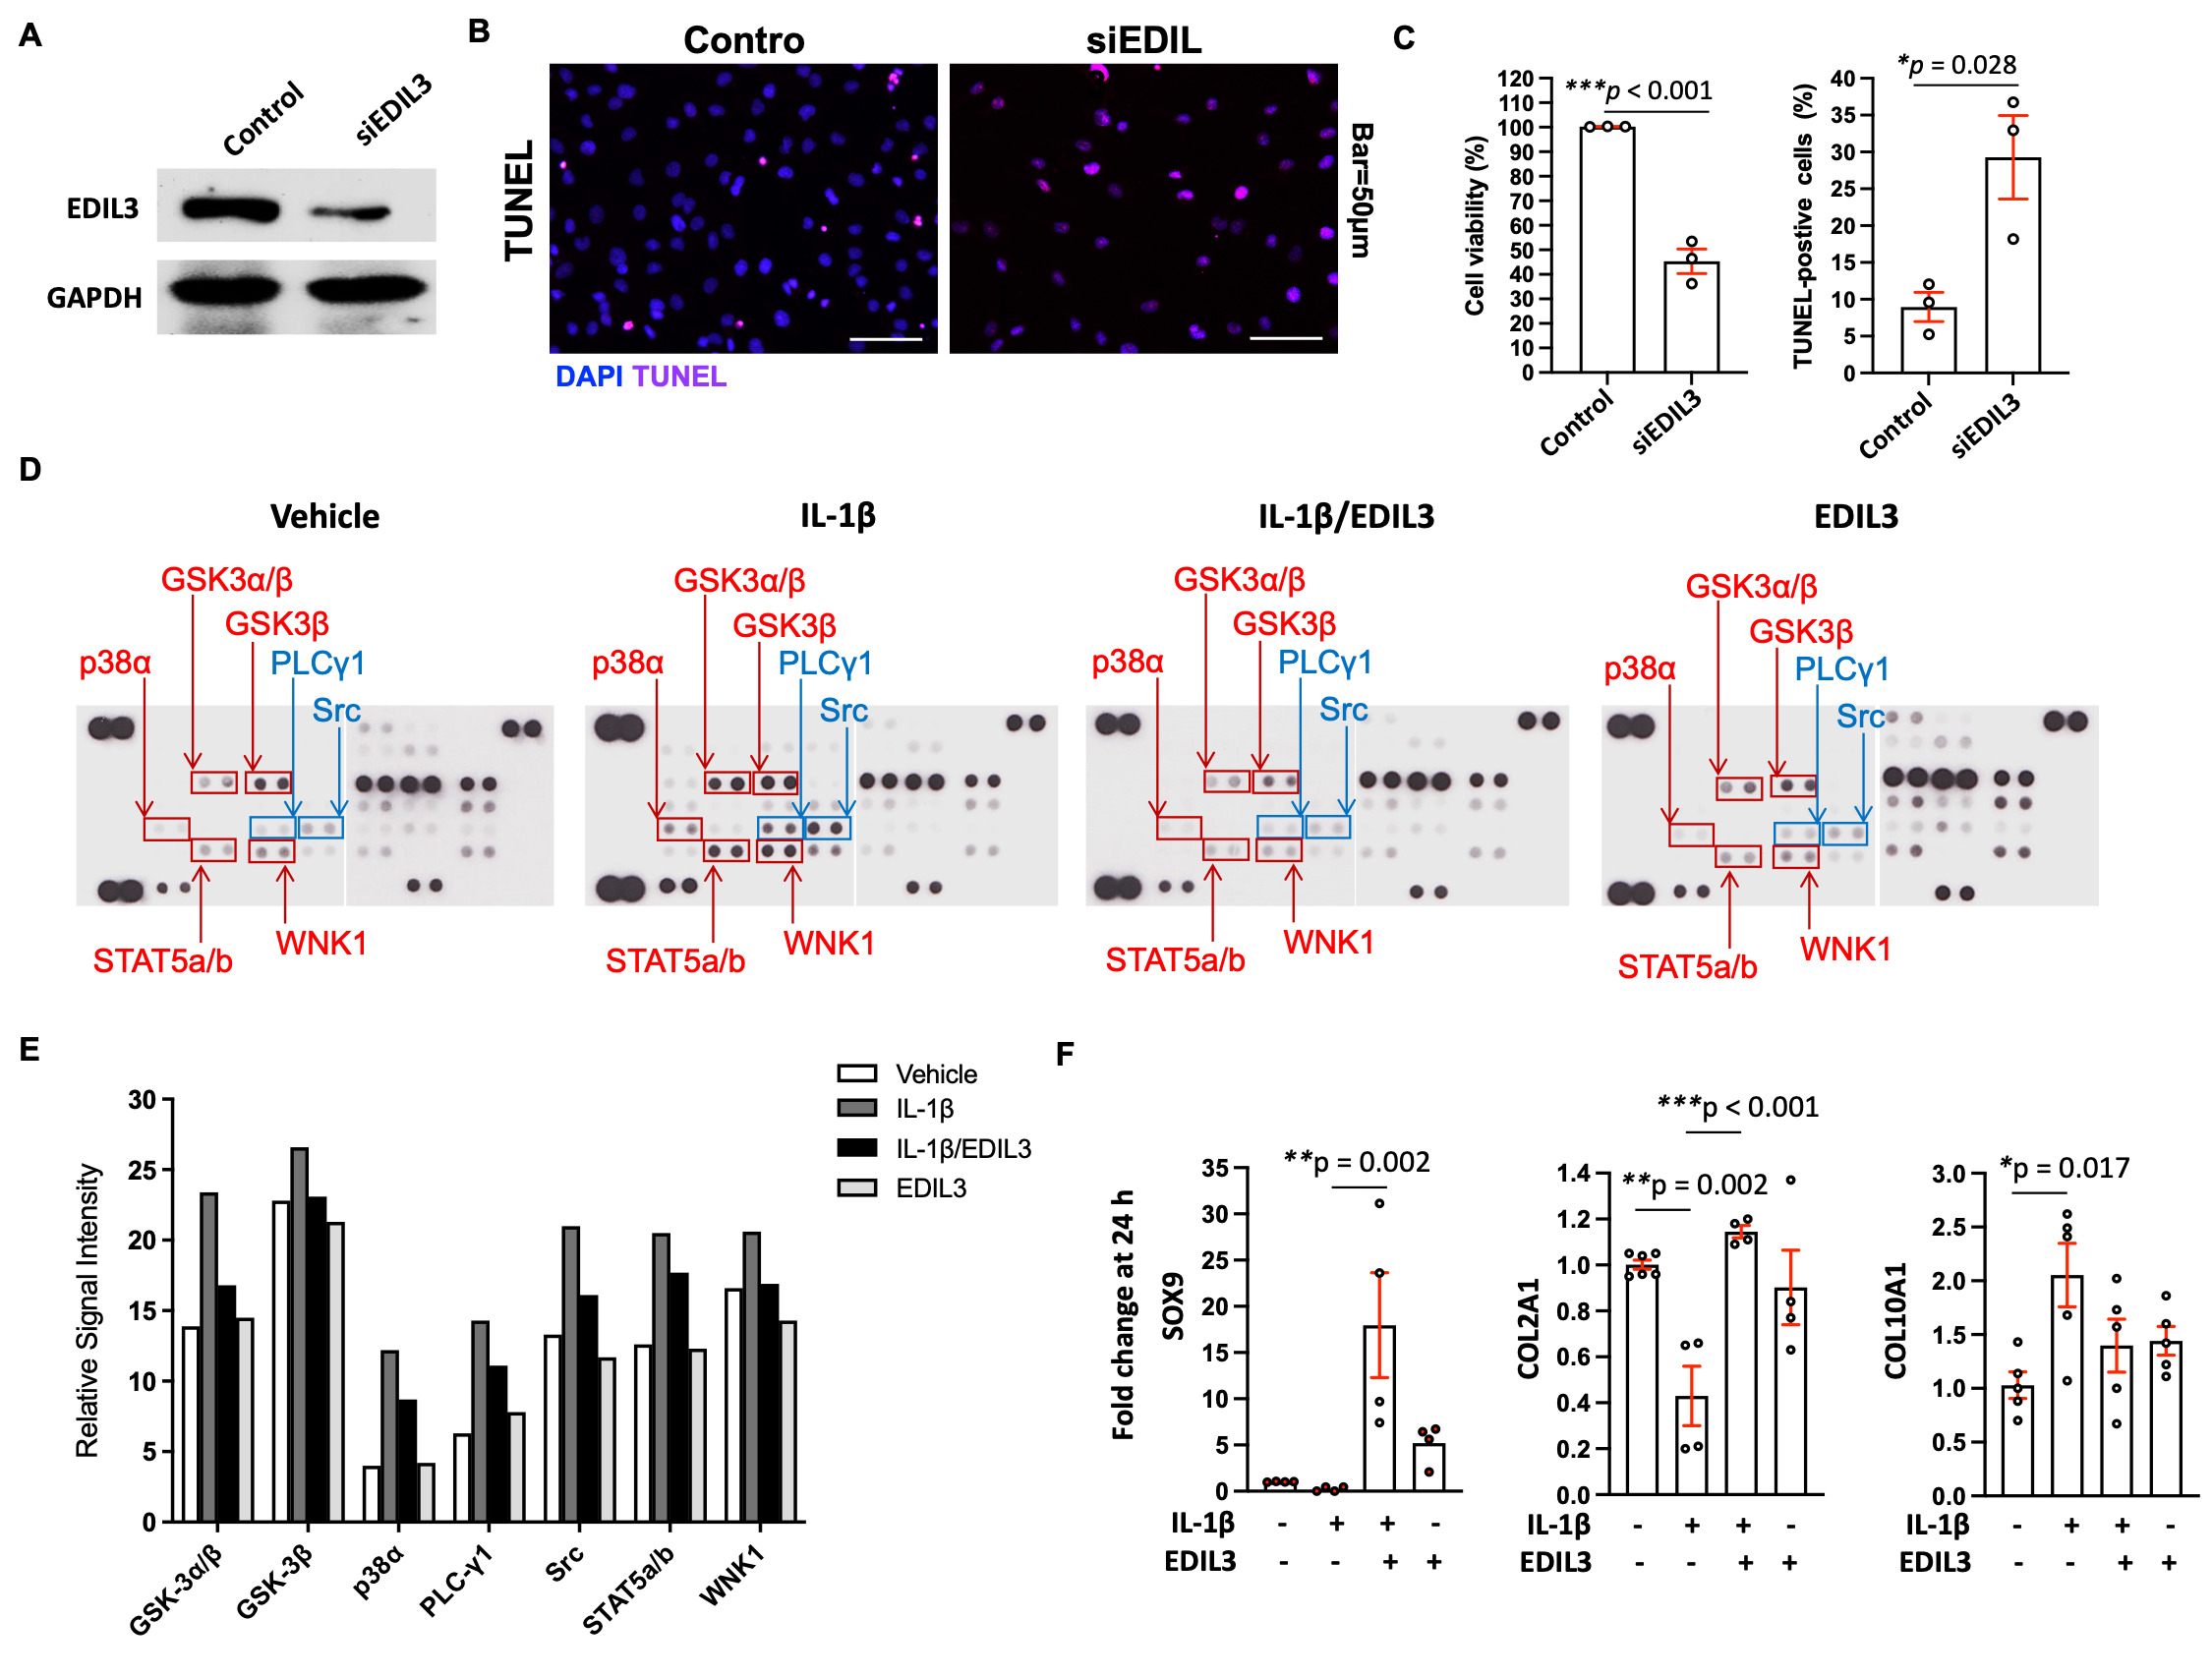 Fig. 6 
            EGF-like repeats and discoidin I-like domains-containing protein 3 (EDIL3) prevents chondrocyte loss by inhibiting phosphorylation of glycogen synthase kinase 3 alpha/beta (GSK-3α/β) and phospholipase C gamma 1 (PLC-γ1). a) Chondrocytes were transfected with siEDIL3 or scramble small interfering RNA (siRNA). In comparison with scramble siRNA, siEDIL3 successfully inhibited EDIL3 protein expression in chondrocytes. b) and c) The siRNA-mediated EDIL3 knockdown in chondrocytes attenuated cell viability and increased TUNEL signal. d) Intracellular proteins were collected from chondrocytes and subsequently phosphokinase protein arrays were performed to measure the phosphorylation profiles of the kinases. e) Spots with high-intensity changes were measured by Image J software. EDIL3 attenuated the interleukin (IL)-1β-enhanced phosphokinase protein expression pattern in the chondrocytes, including GSK-3α/β, p38α, PLC-γ1, Src, STAT5ab, and WNK1. f) Hypertrophic chondrocyte-related genes were measured in IL-1β-treated chondrocytes, including SOX9, type II procollagen gene (COL2A1), and COL10A1. EDIL3 restored IL-1β-decreased SOX9 and COL2A1 expression. EDIL3 did not prevent IL-1β-increased type X procollagen gene (COL10A1) expression. Data are presented as means and standard deviations. *p < 0.05, **p < 0.01, ***p < 0.001. Data in c) were analyzed using an independent-samples t-test. Data presented in f) were analyzed using one-way analysis of variance followed by Tukey’s multiple comparison test for selected pairs of groups for multiple comparisons. DAPI, 4′,6-diamidino-2-phenylindole; GAPDH, glyceraldehyde 3-phosphate dehydrogenase.
          